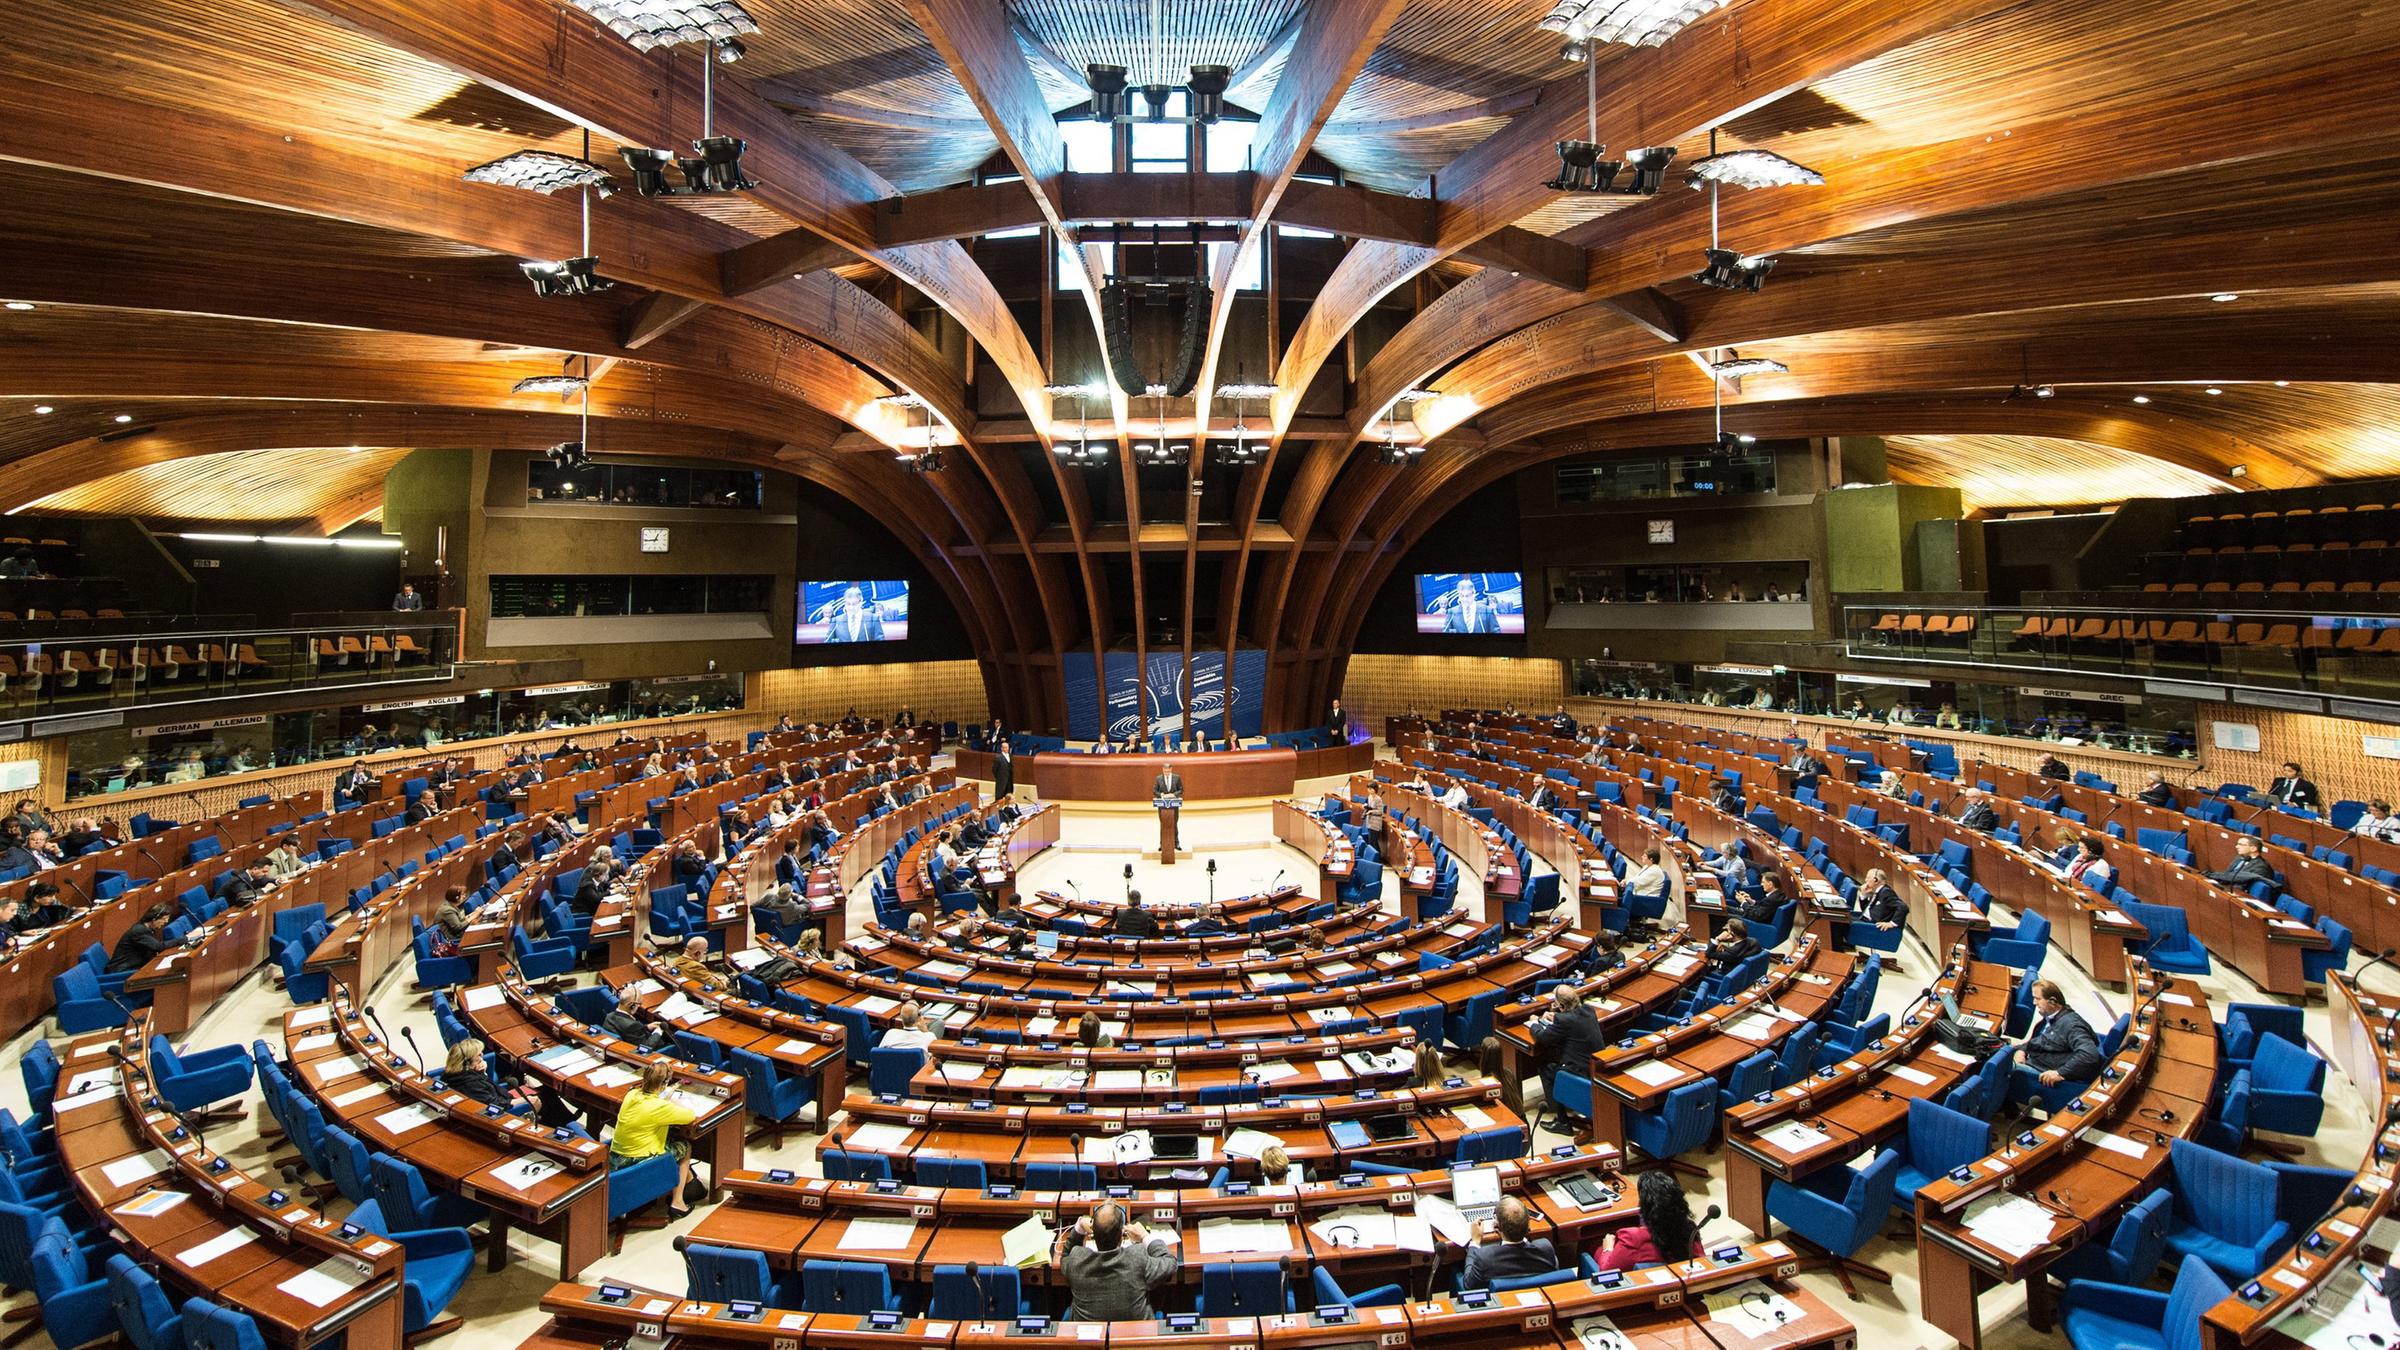 Archive: Council of Europe in Strasbourg